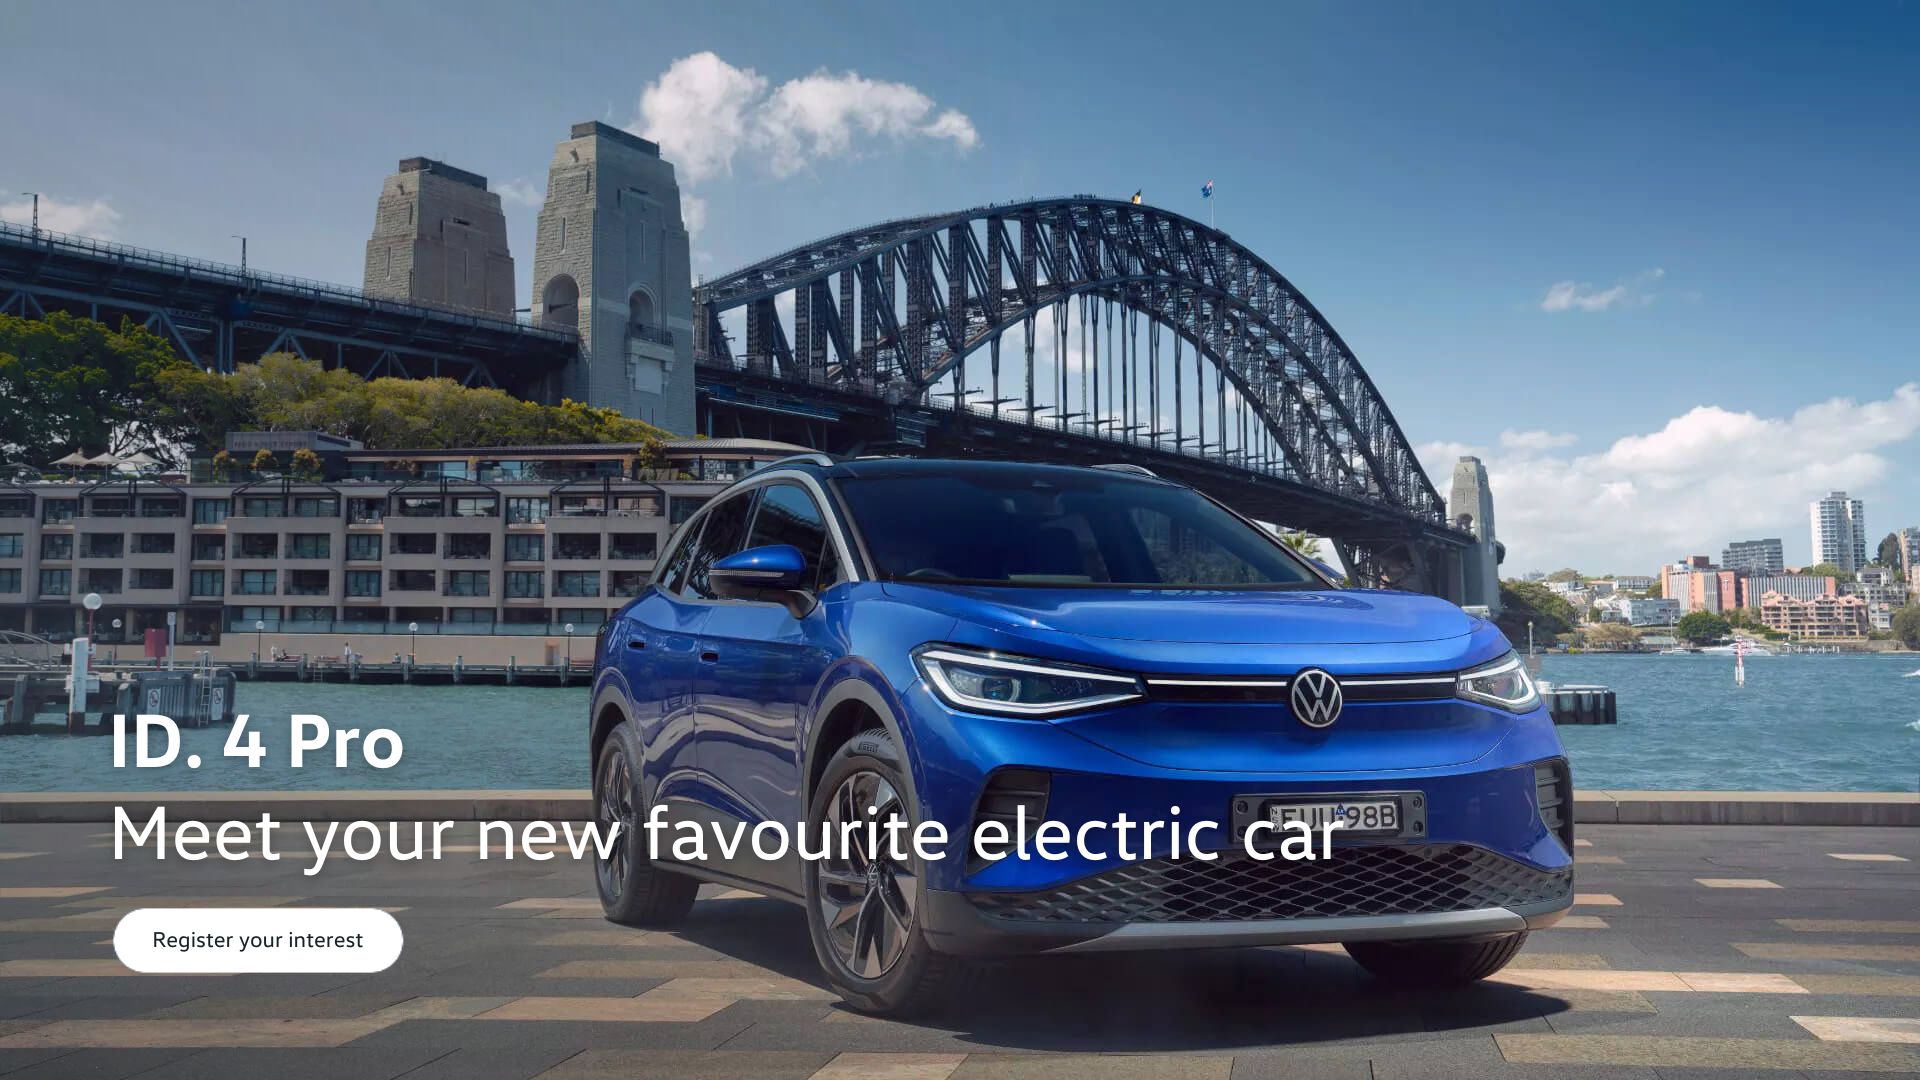 ID. 4 Pro | Meet your new favourite electric car